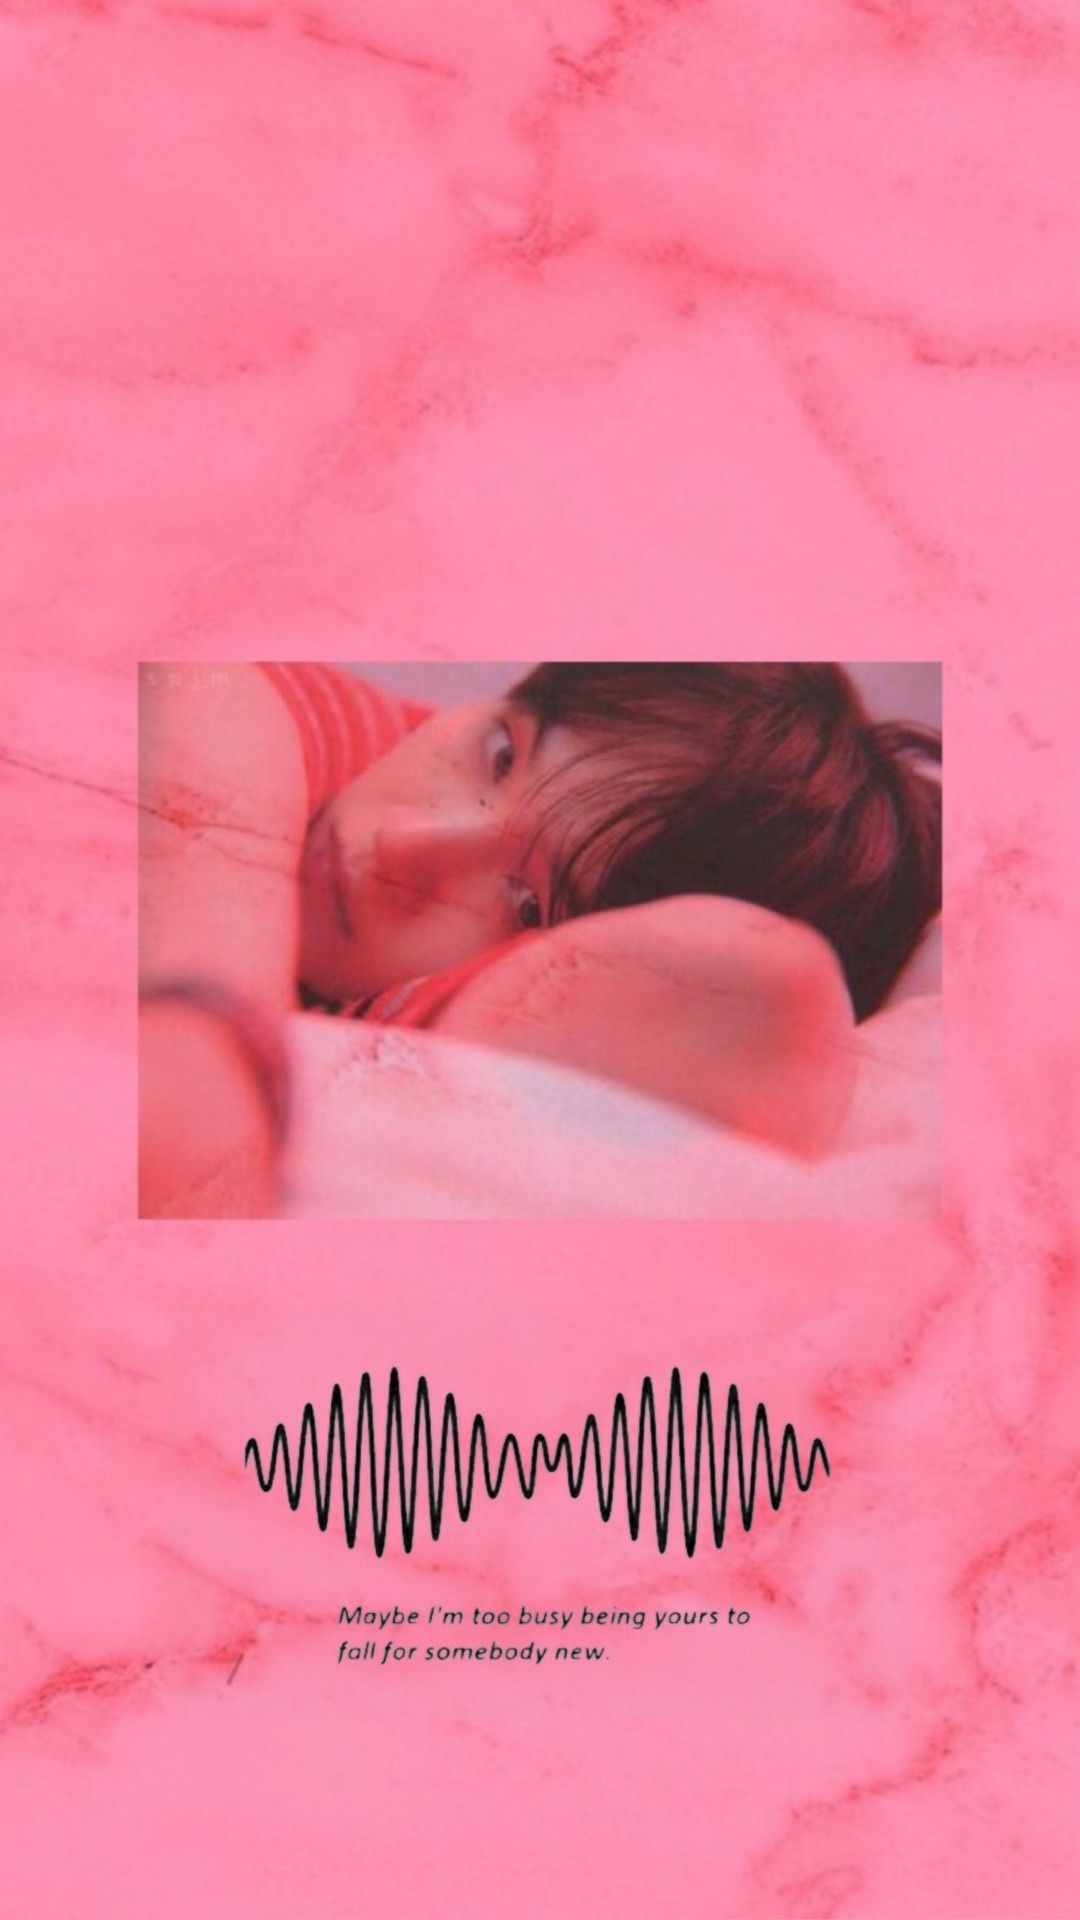 Pink aesthetic wallpaper for phone with text that says 